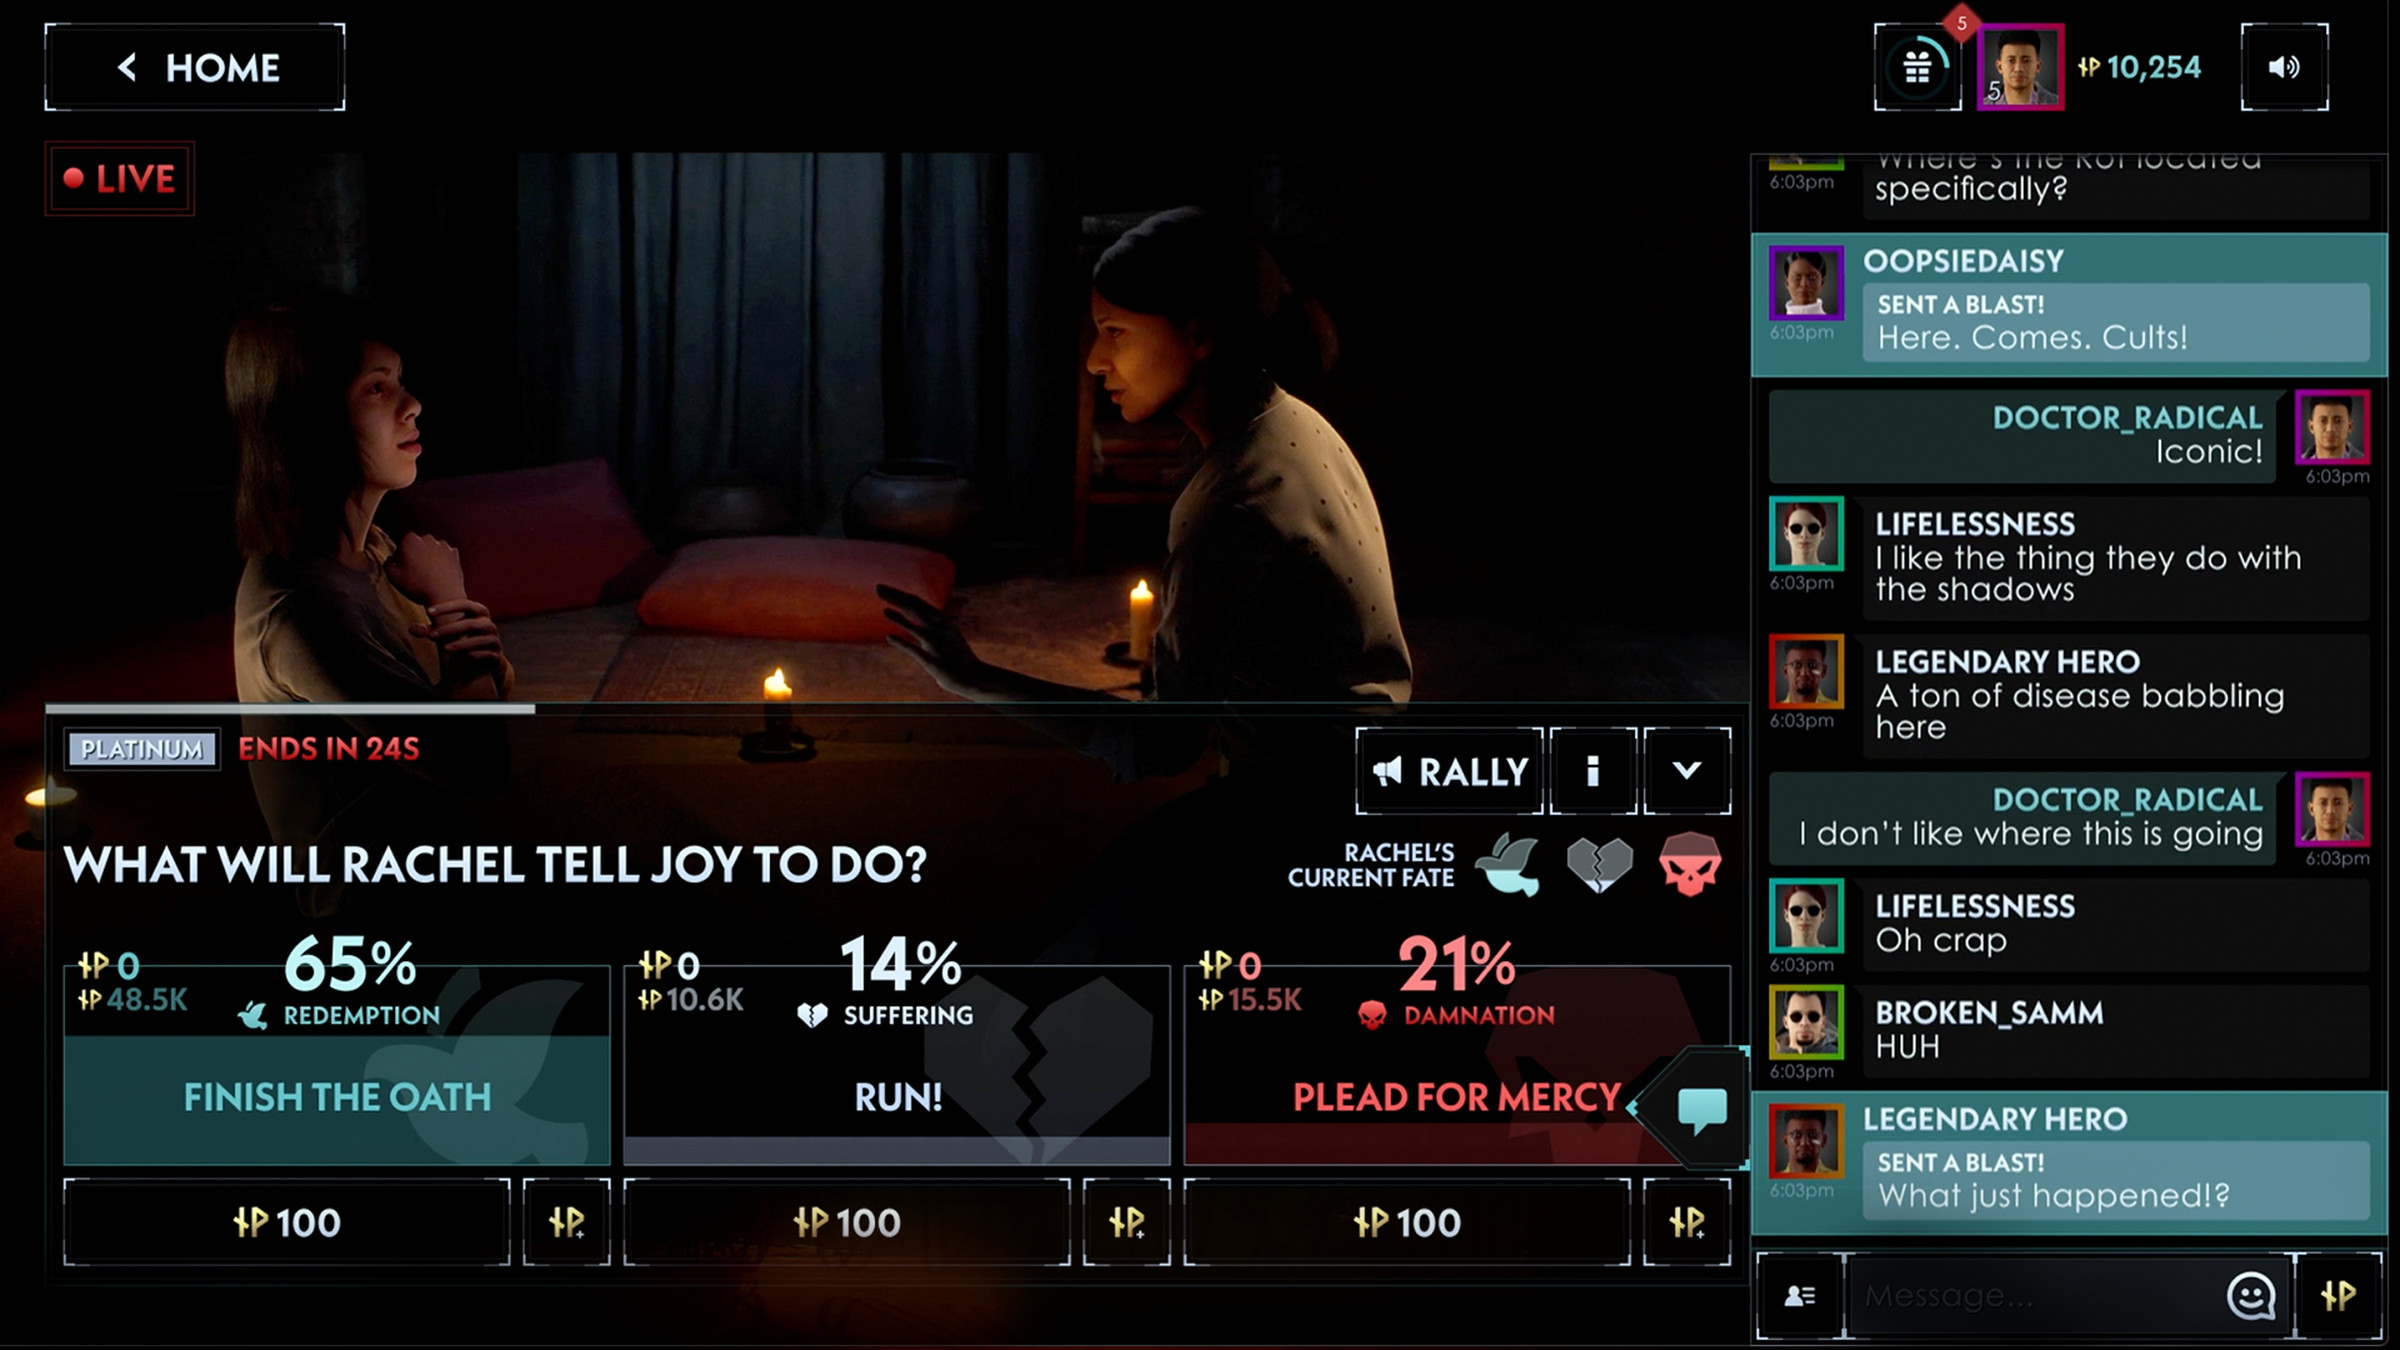 A screenshot from the streaming series Silent Hill: Ascension